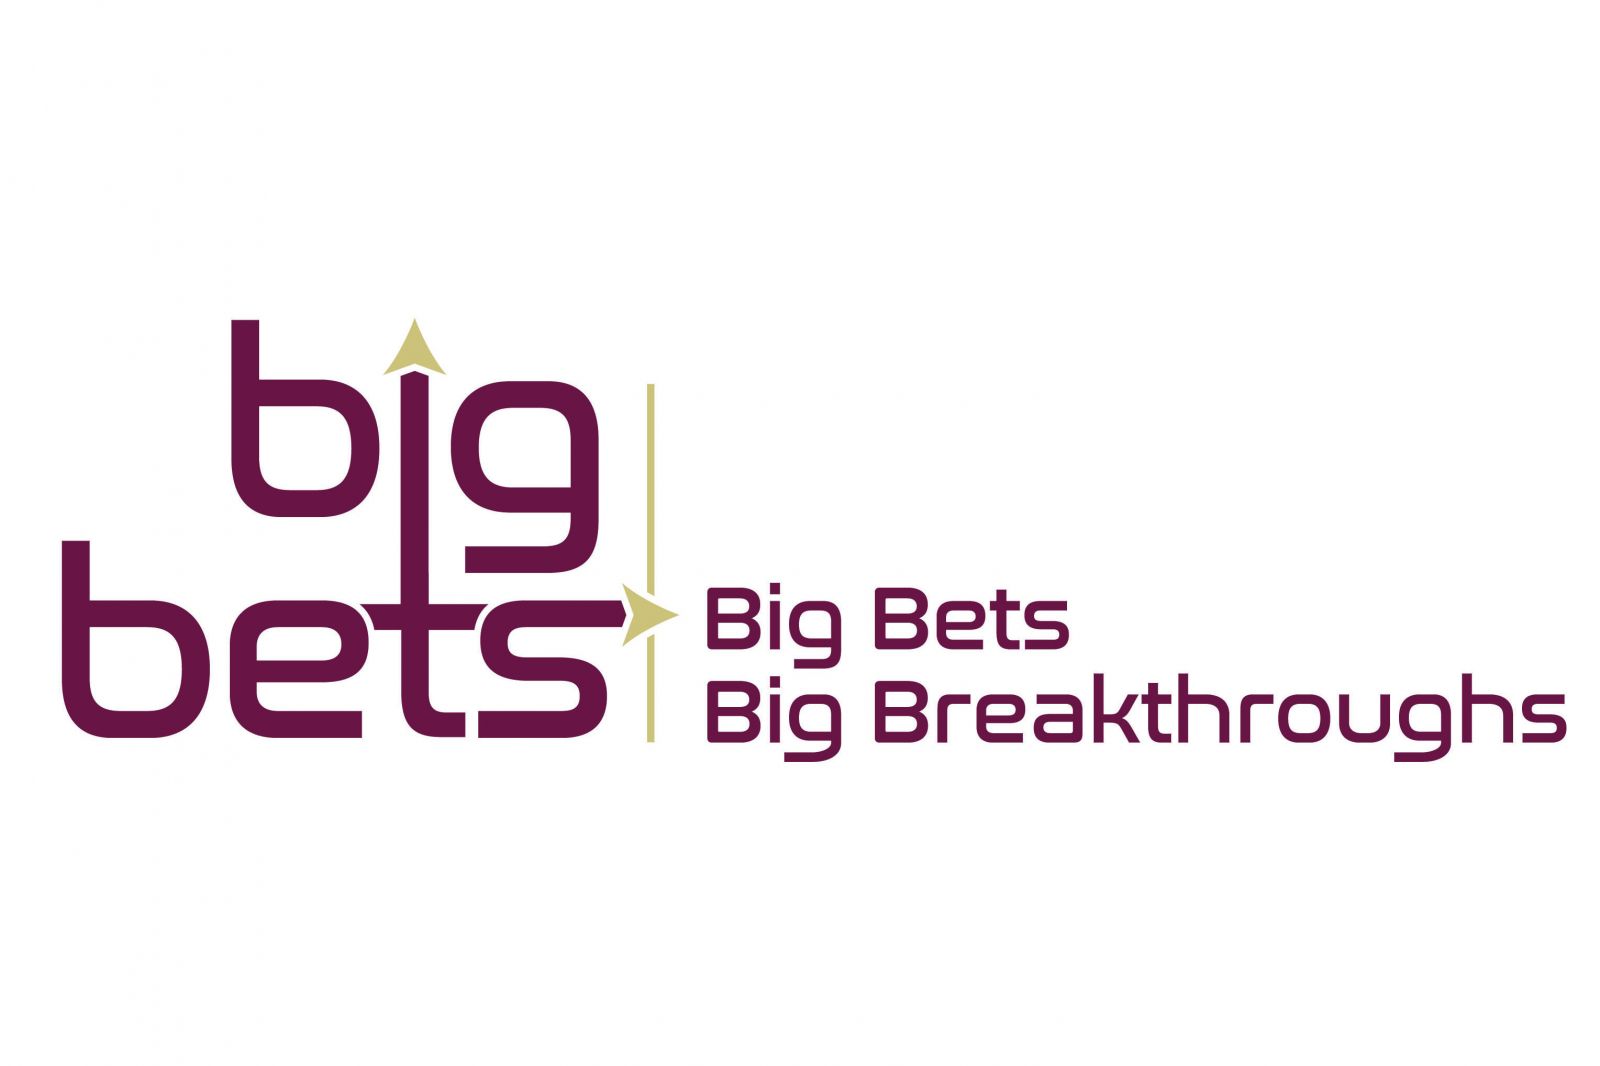 Big Bets graphic